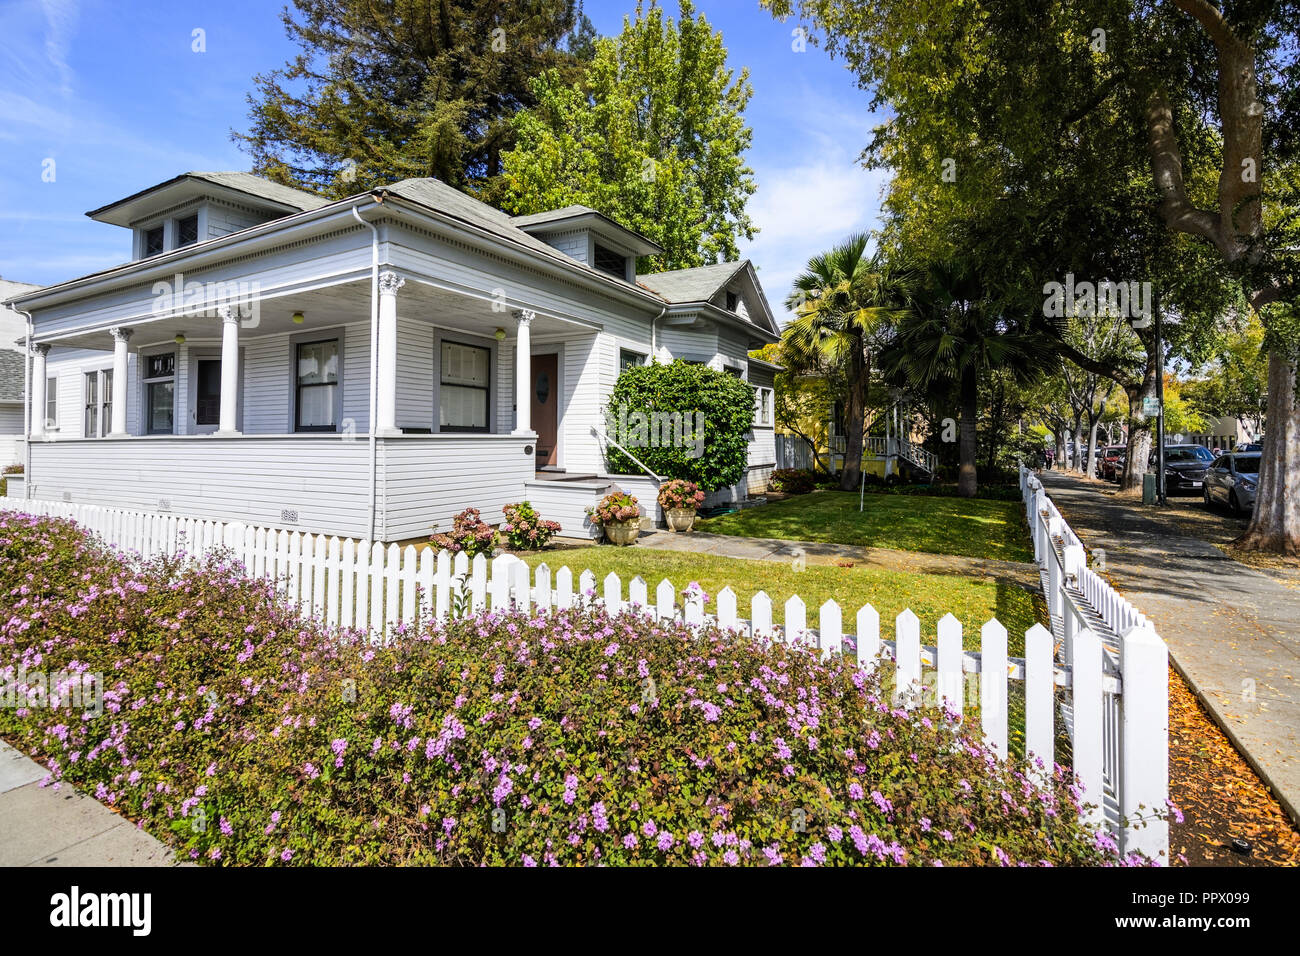 Exterior View Of Wooden House Surrounded By A White Fence In One Of The Residential Areas Of Palo Alto South San Francisco Bay Area Stock Photo Alamy